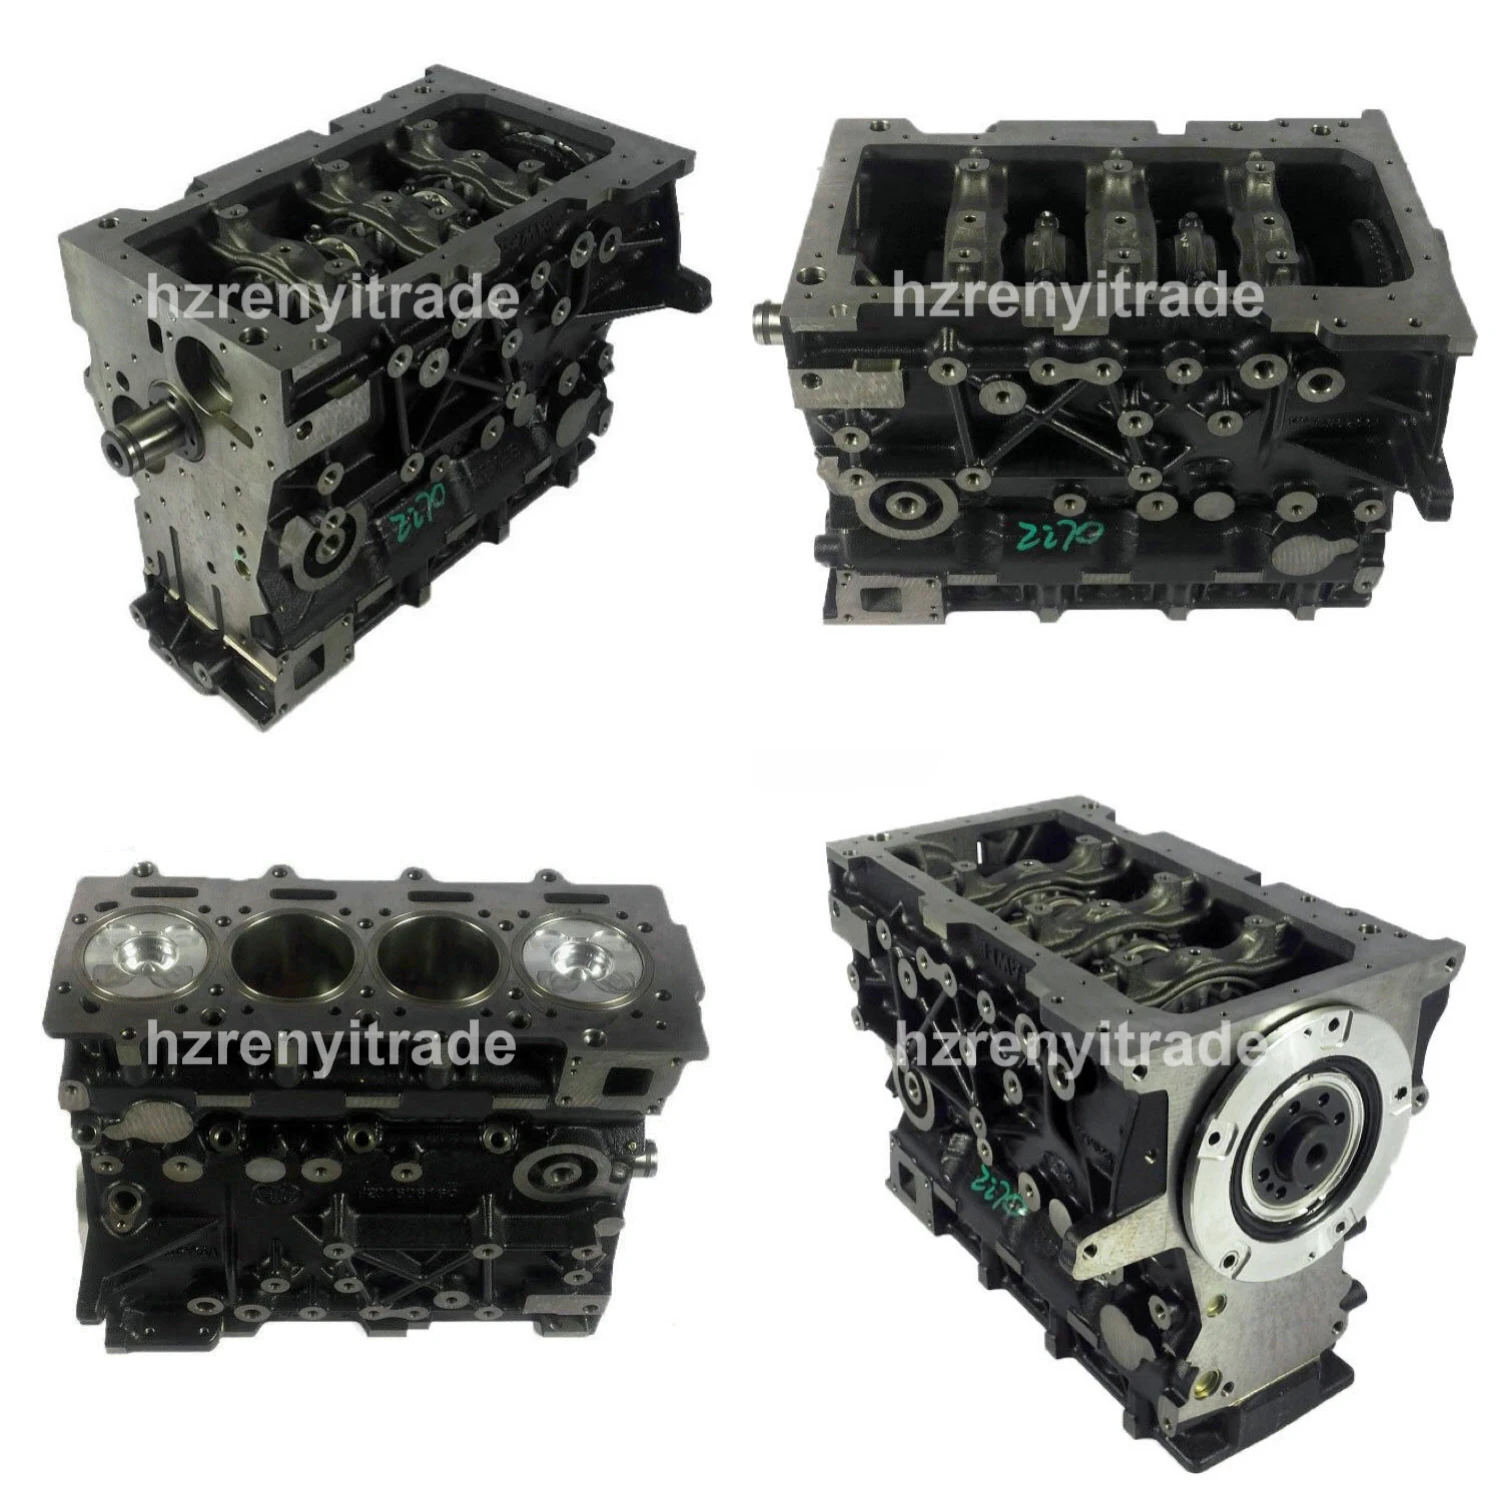 Brand New Engine Parts Italian Vm R425   Dohc Motori Diesel Crate  Engine For  Taxi Jeep For Sale - Buy Vm Engine, Vm Diesel Engine,  Vm Motori Diesel Engine Product